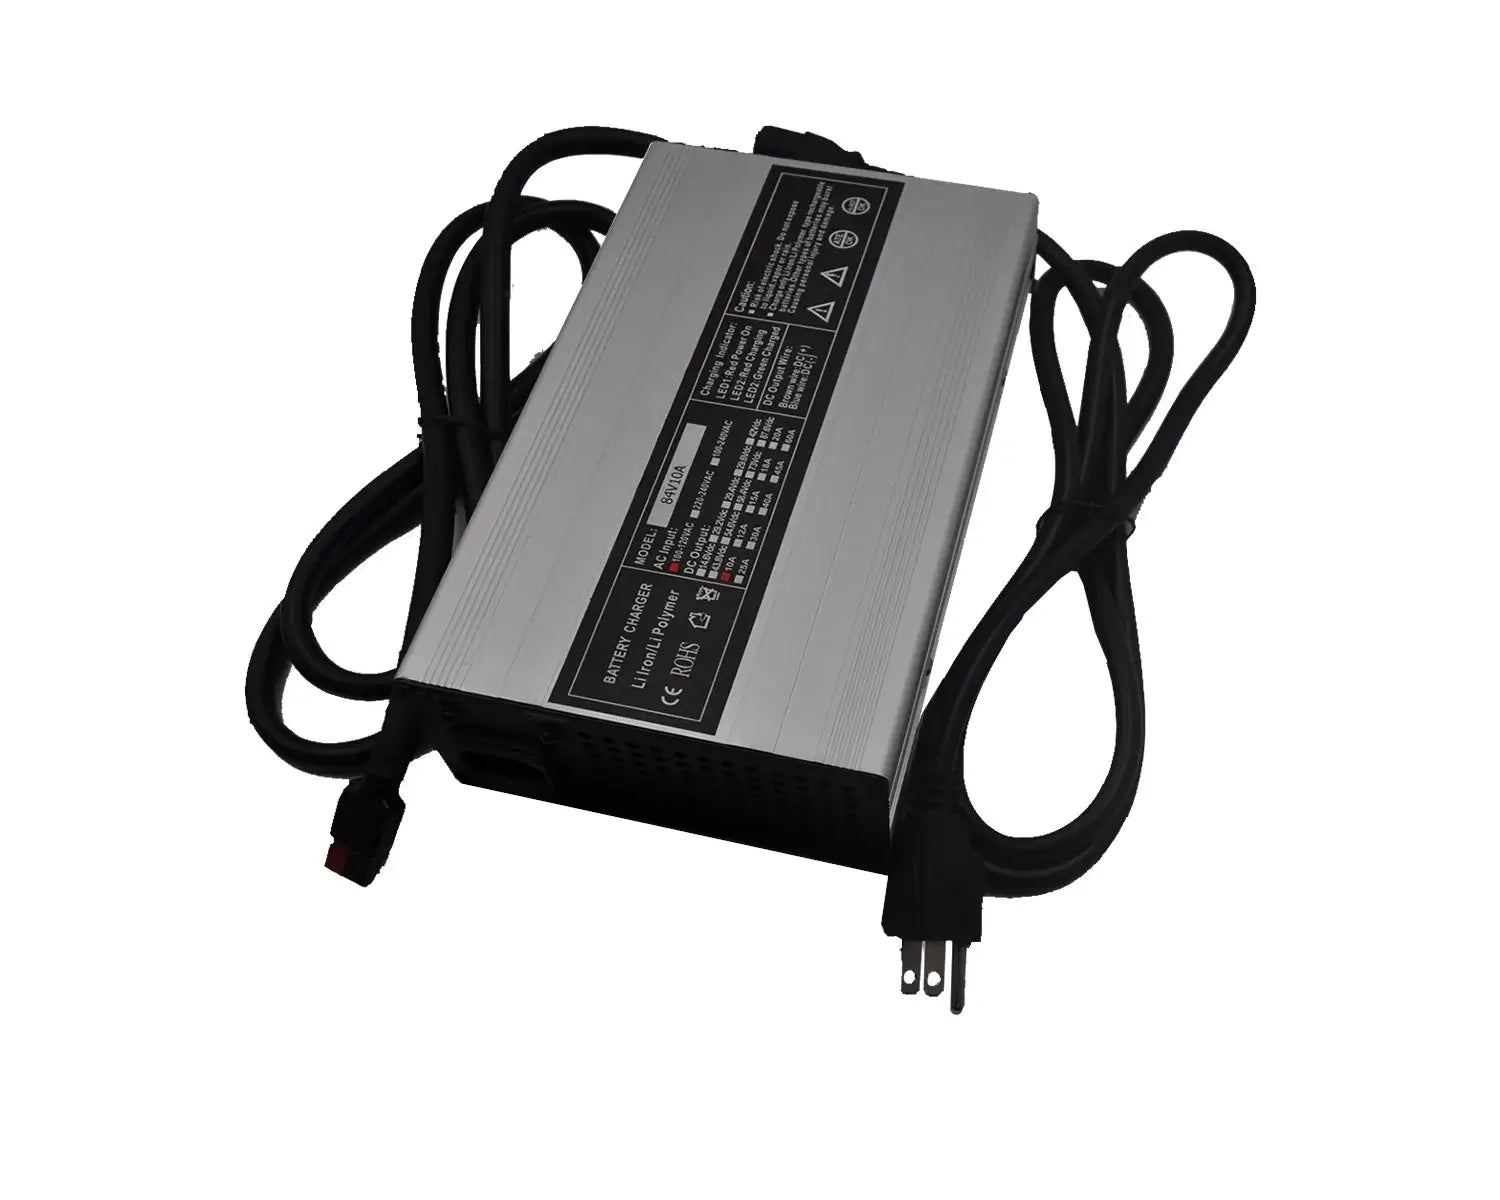 72V 10A Li-ion Battery Charger - Aegis Battery Lithium ion